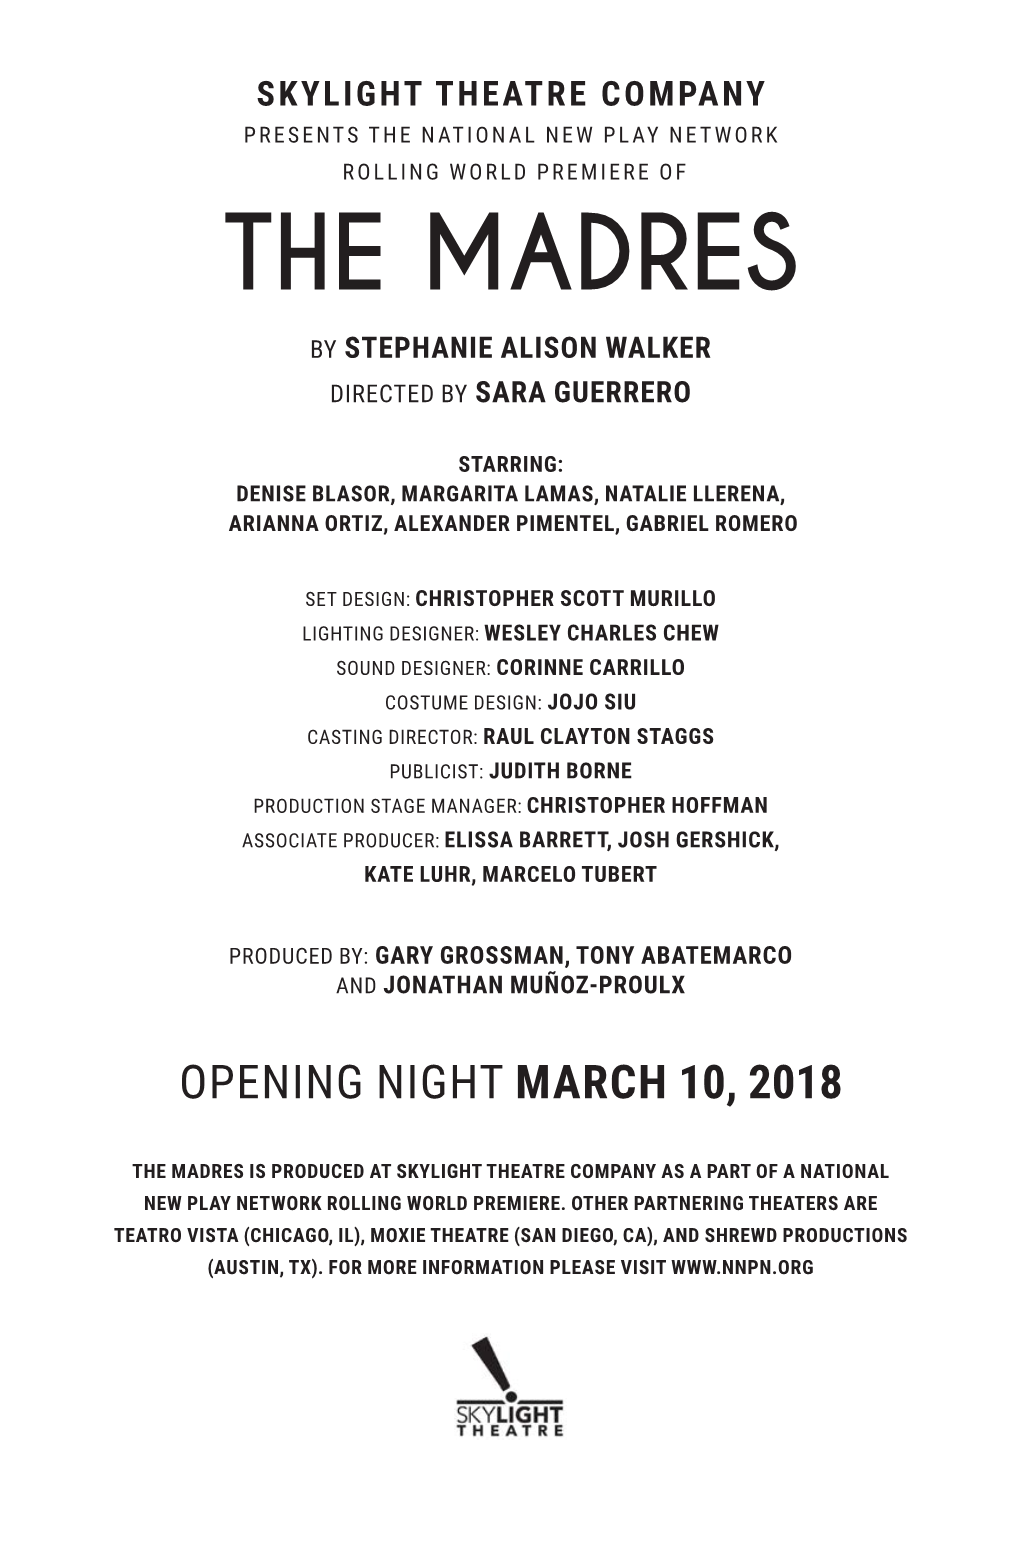 The Madres by Stephanie Alison Walker Directed by Sara Guerrero